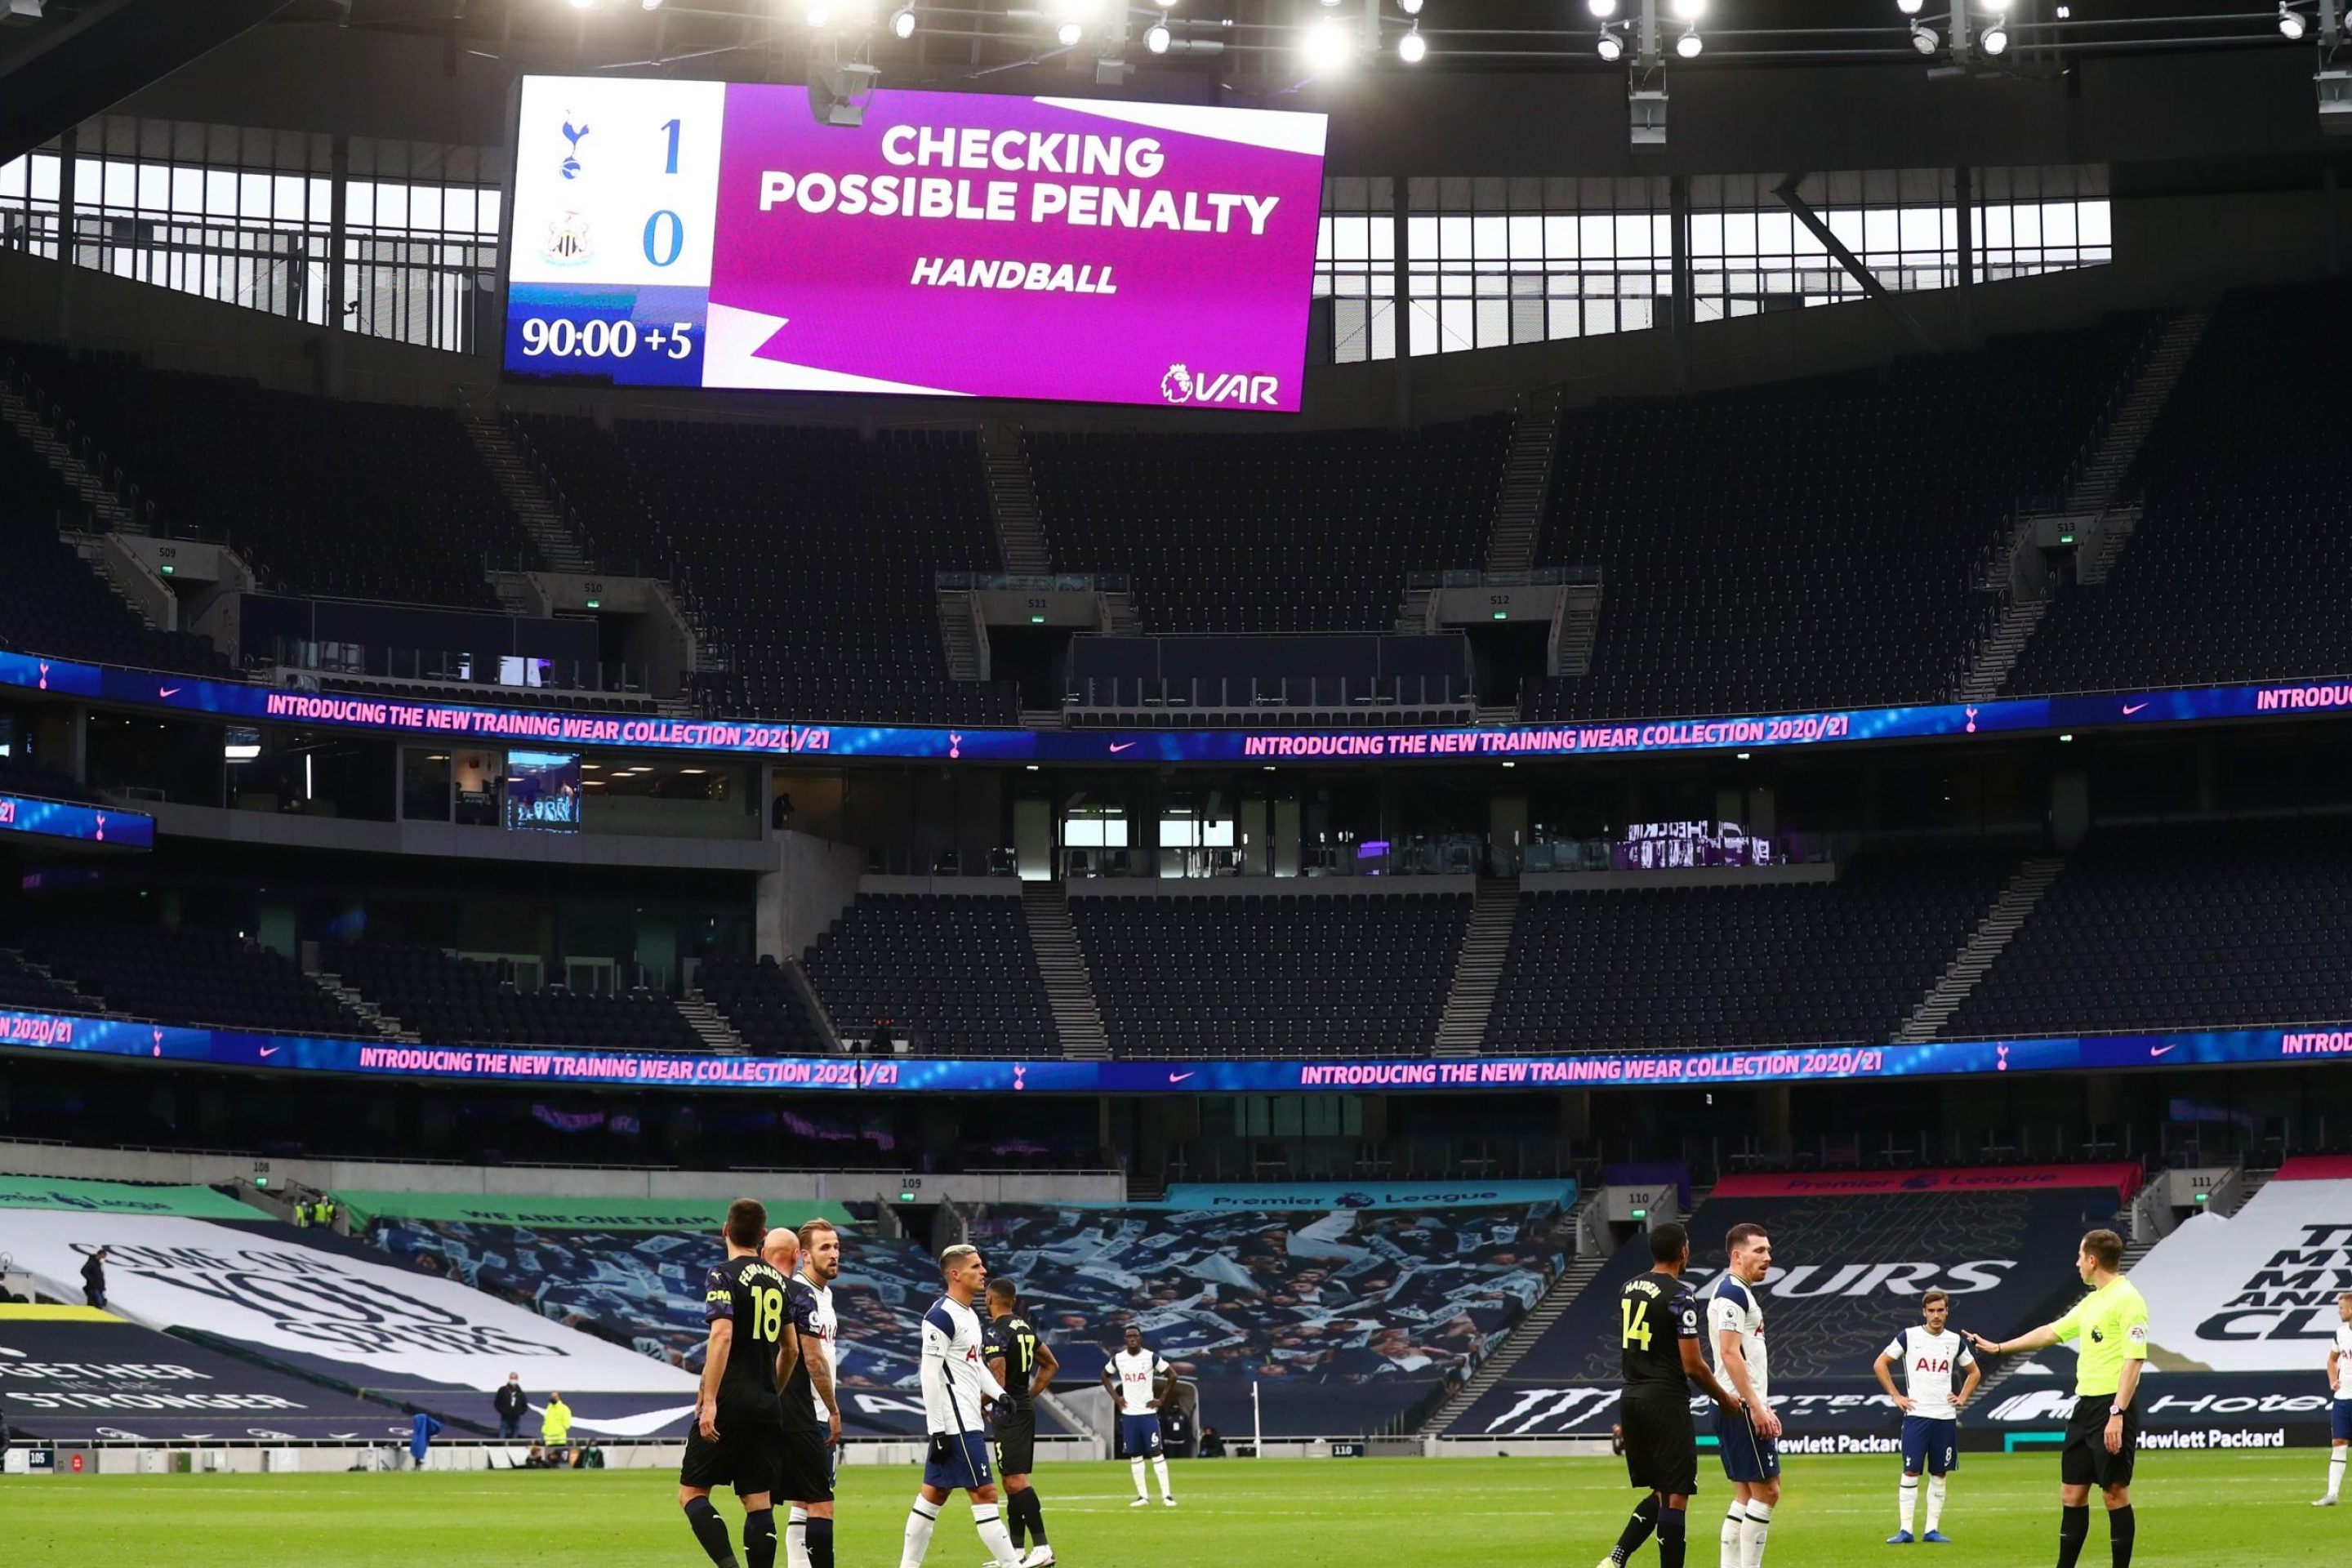 A screen inside the stadium displays the decision to check VAR for a possible penalty during the Premier League match between Tottenham Hotspur and Newcastle United at Tottenham Hotspur Stadium on September 27, 2020